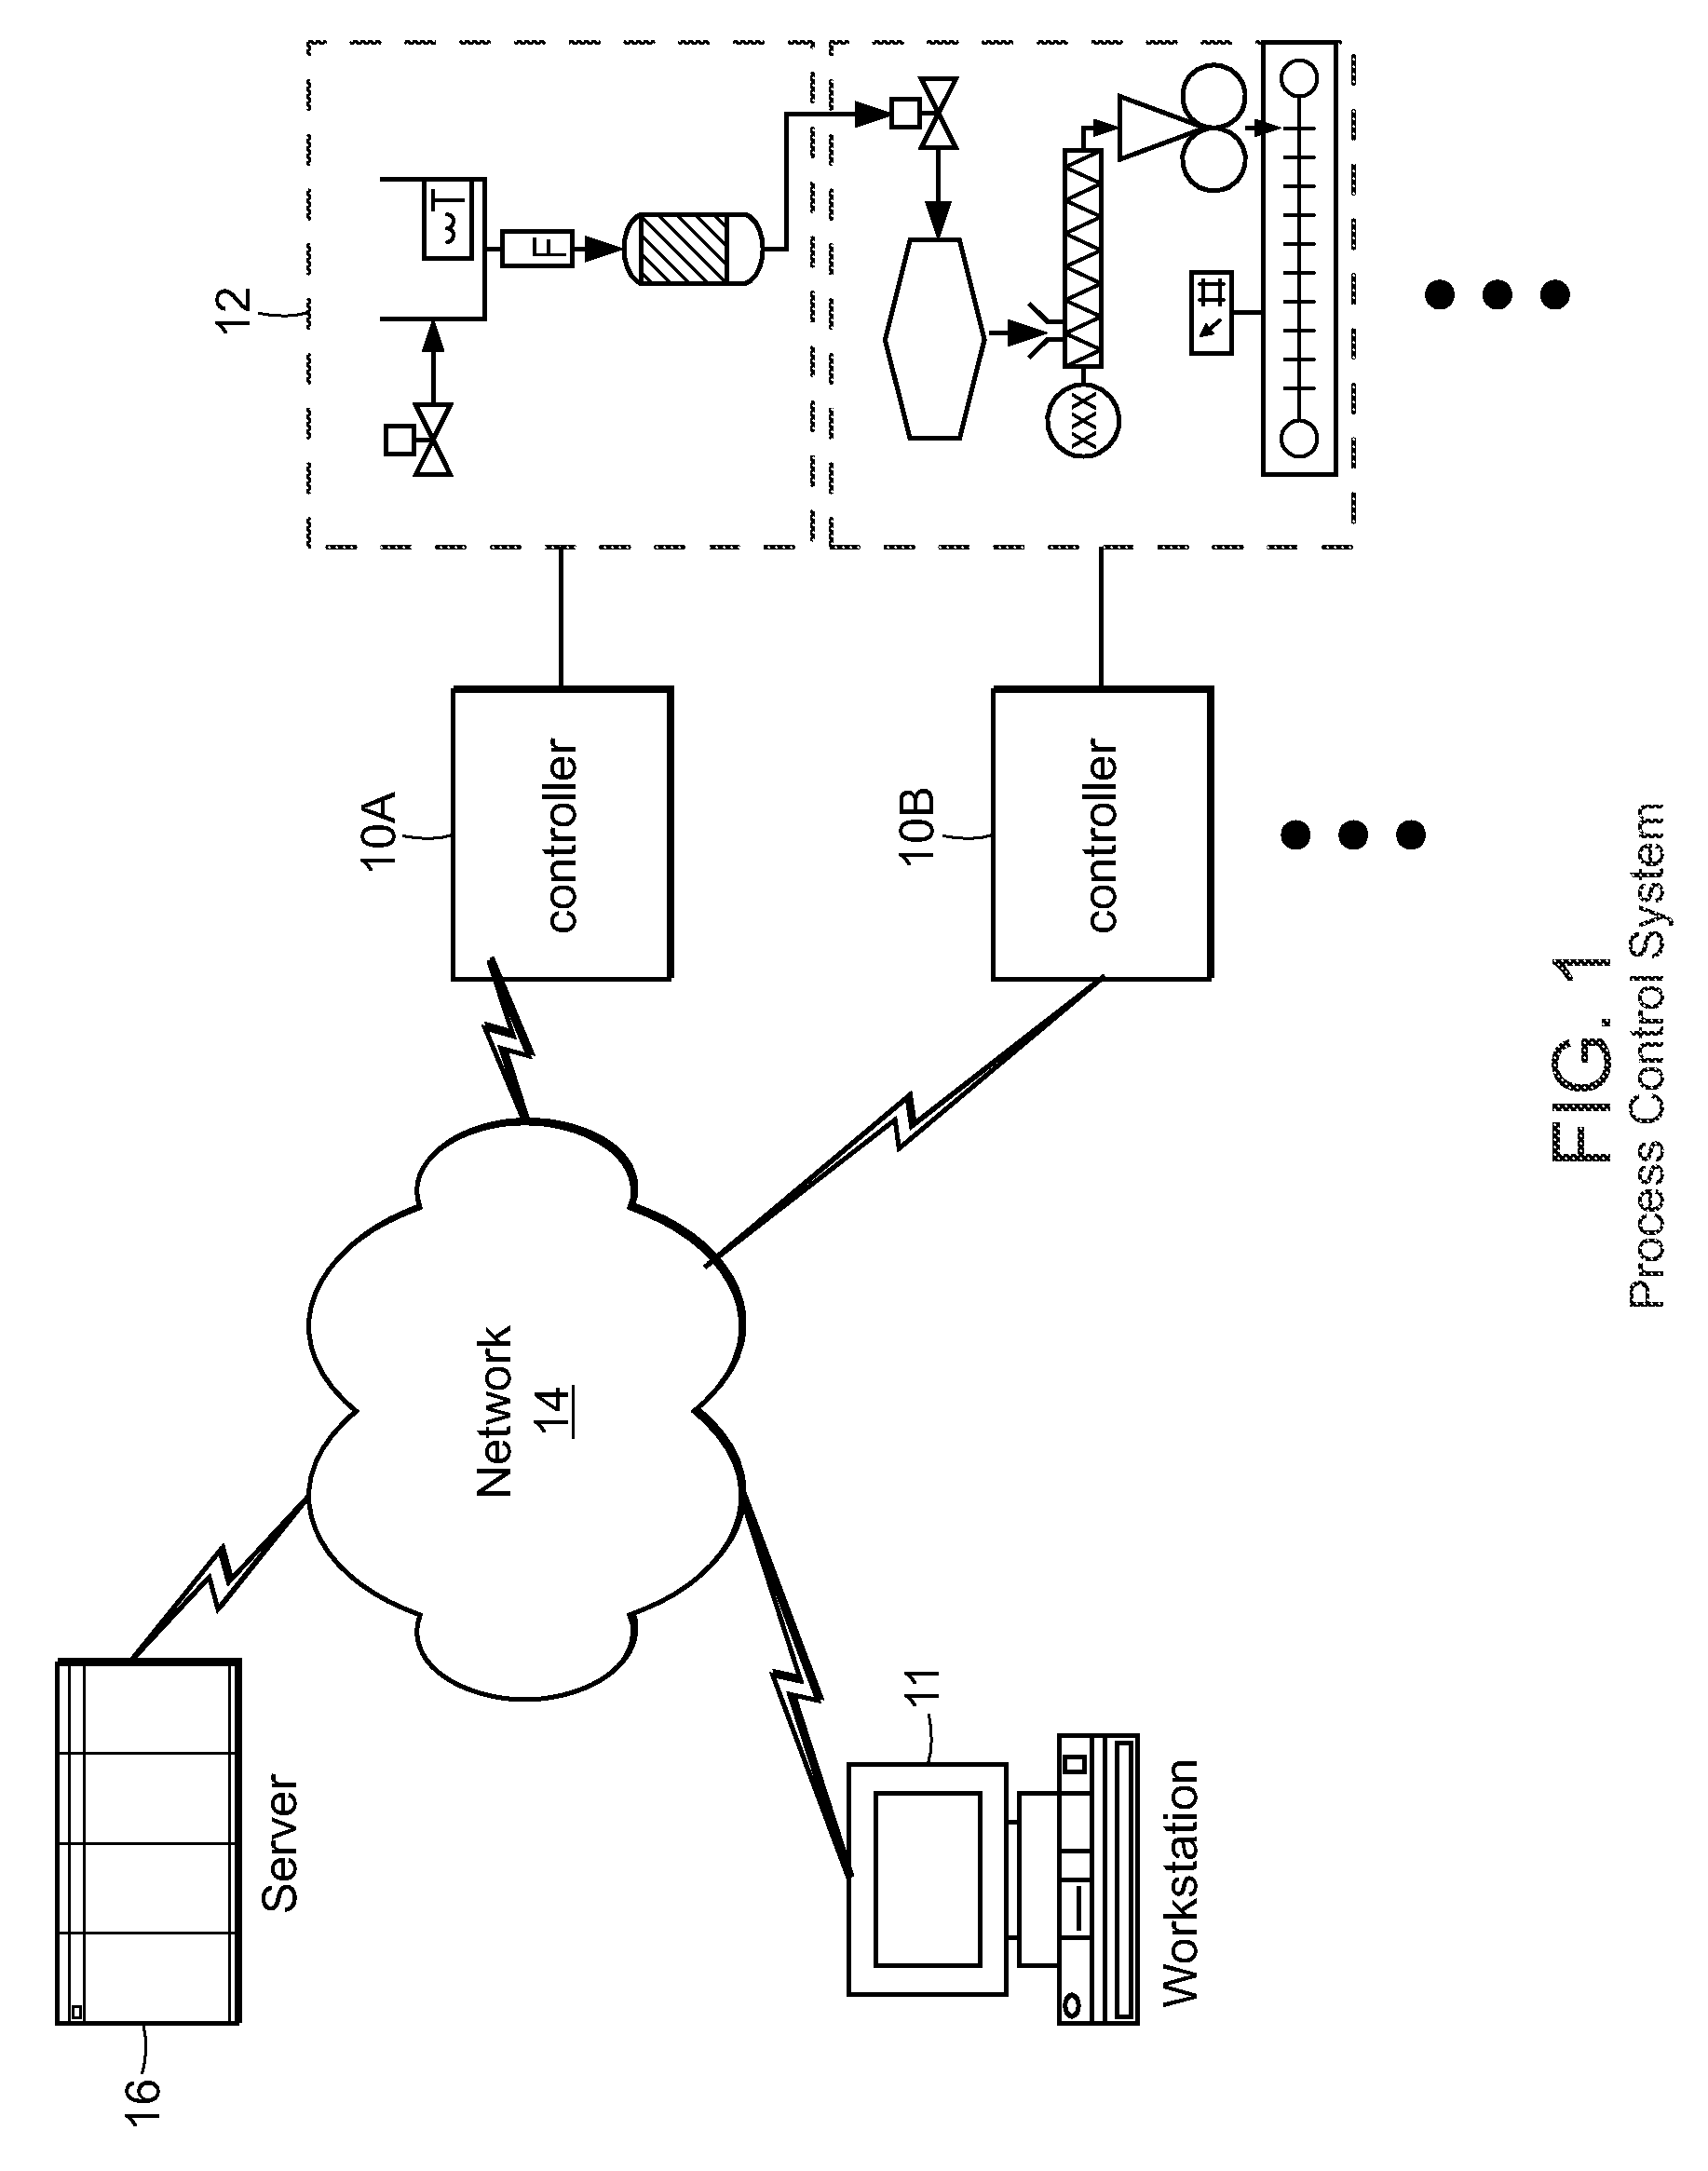 Control system configuration and methods with object characteristic swapping